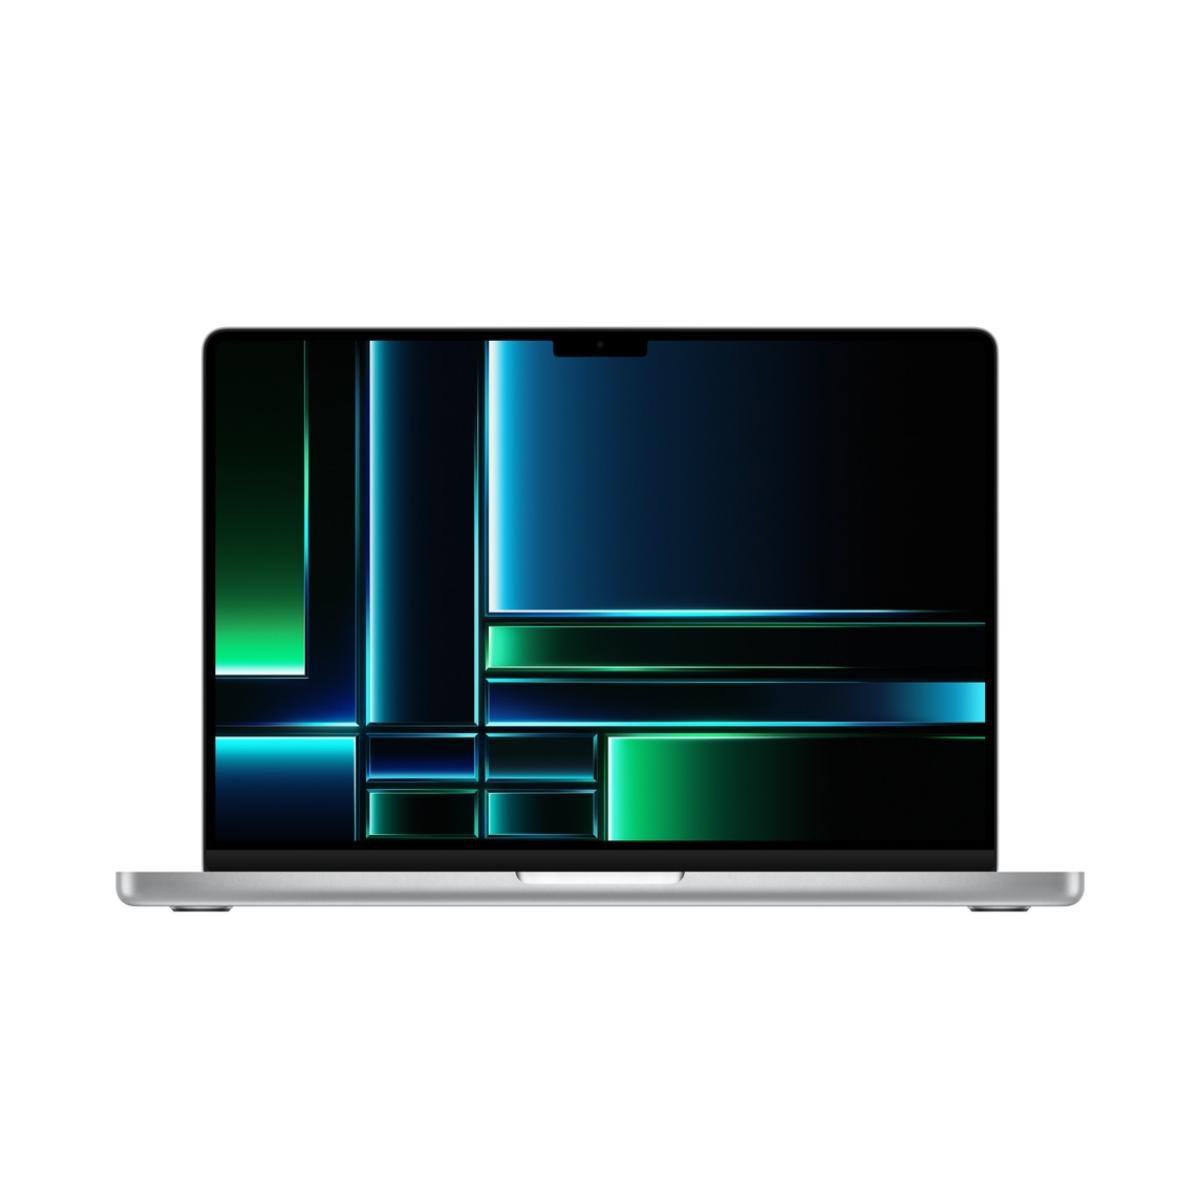 MPHH3AB/A / 14-inch MacBook Pro: Apple M2 Pro chip with 10?core CPU and 16?core GPU, 512GB SSD - Sil 512 GB / Silver / M2 Chip